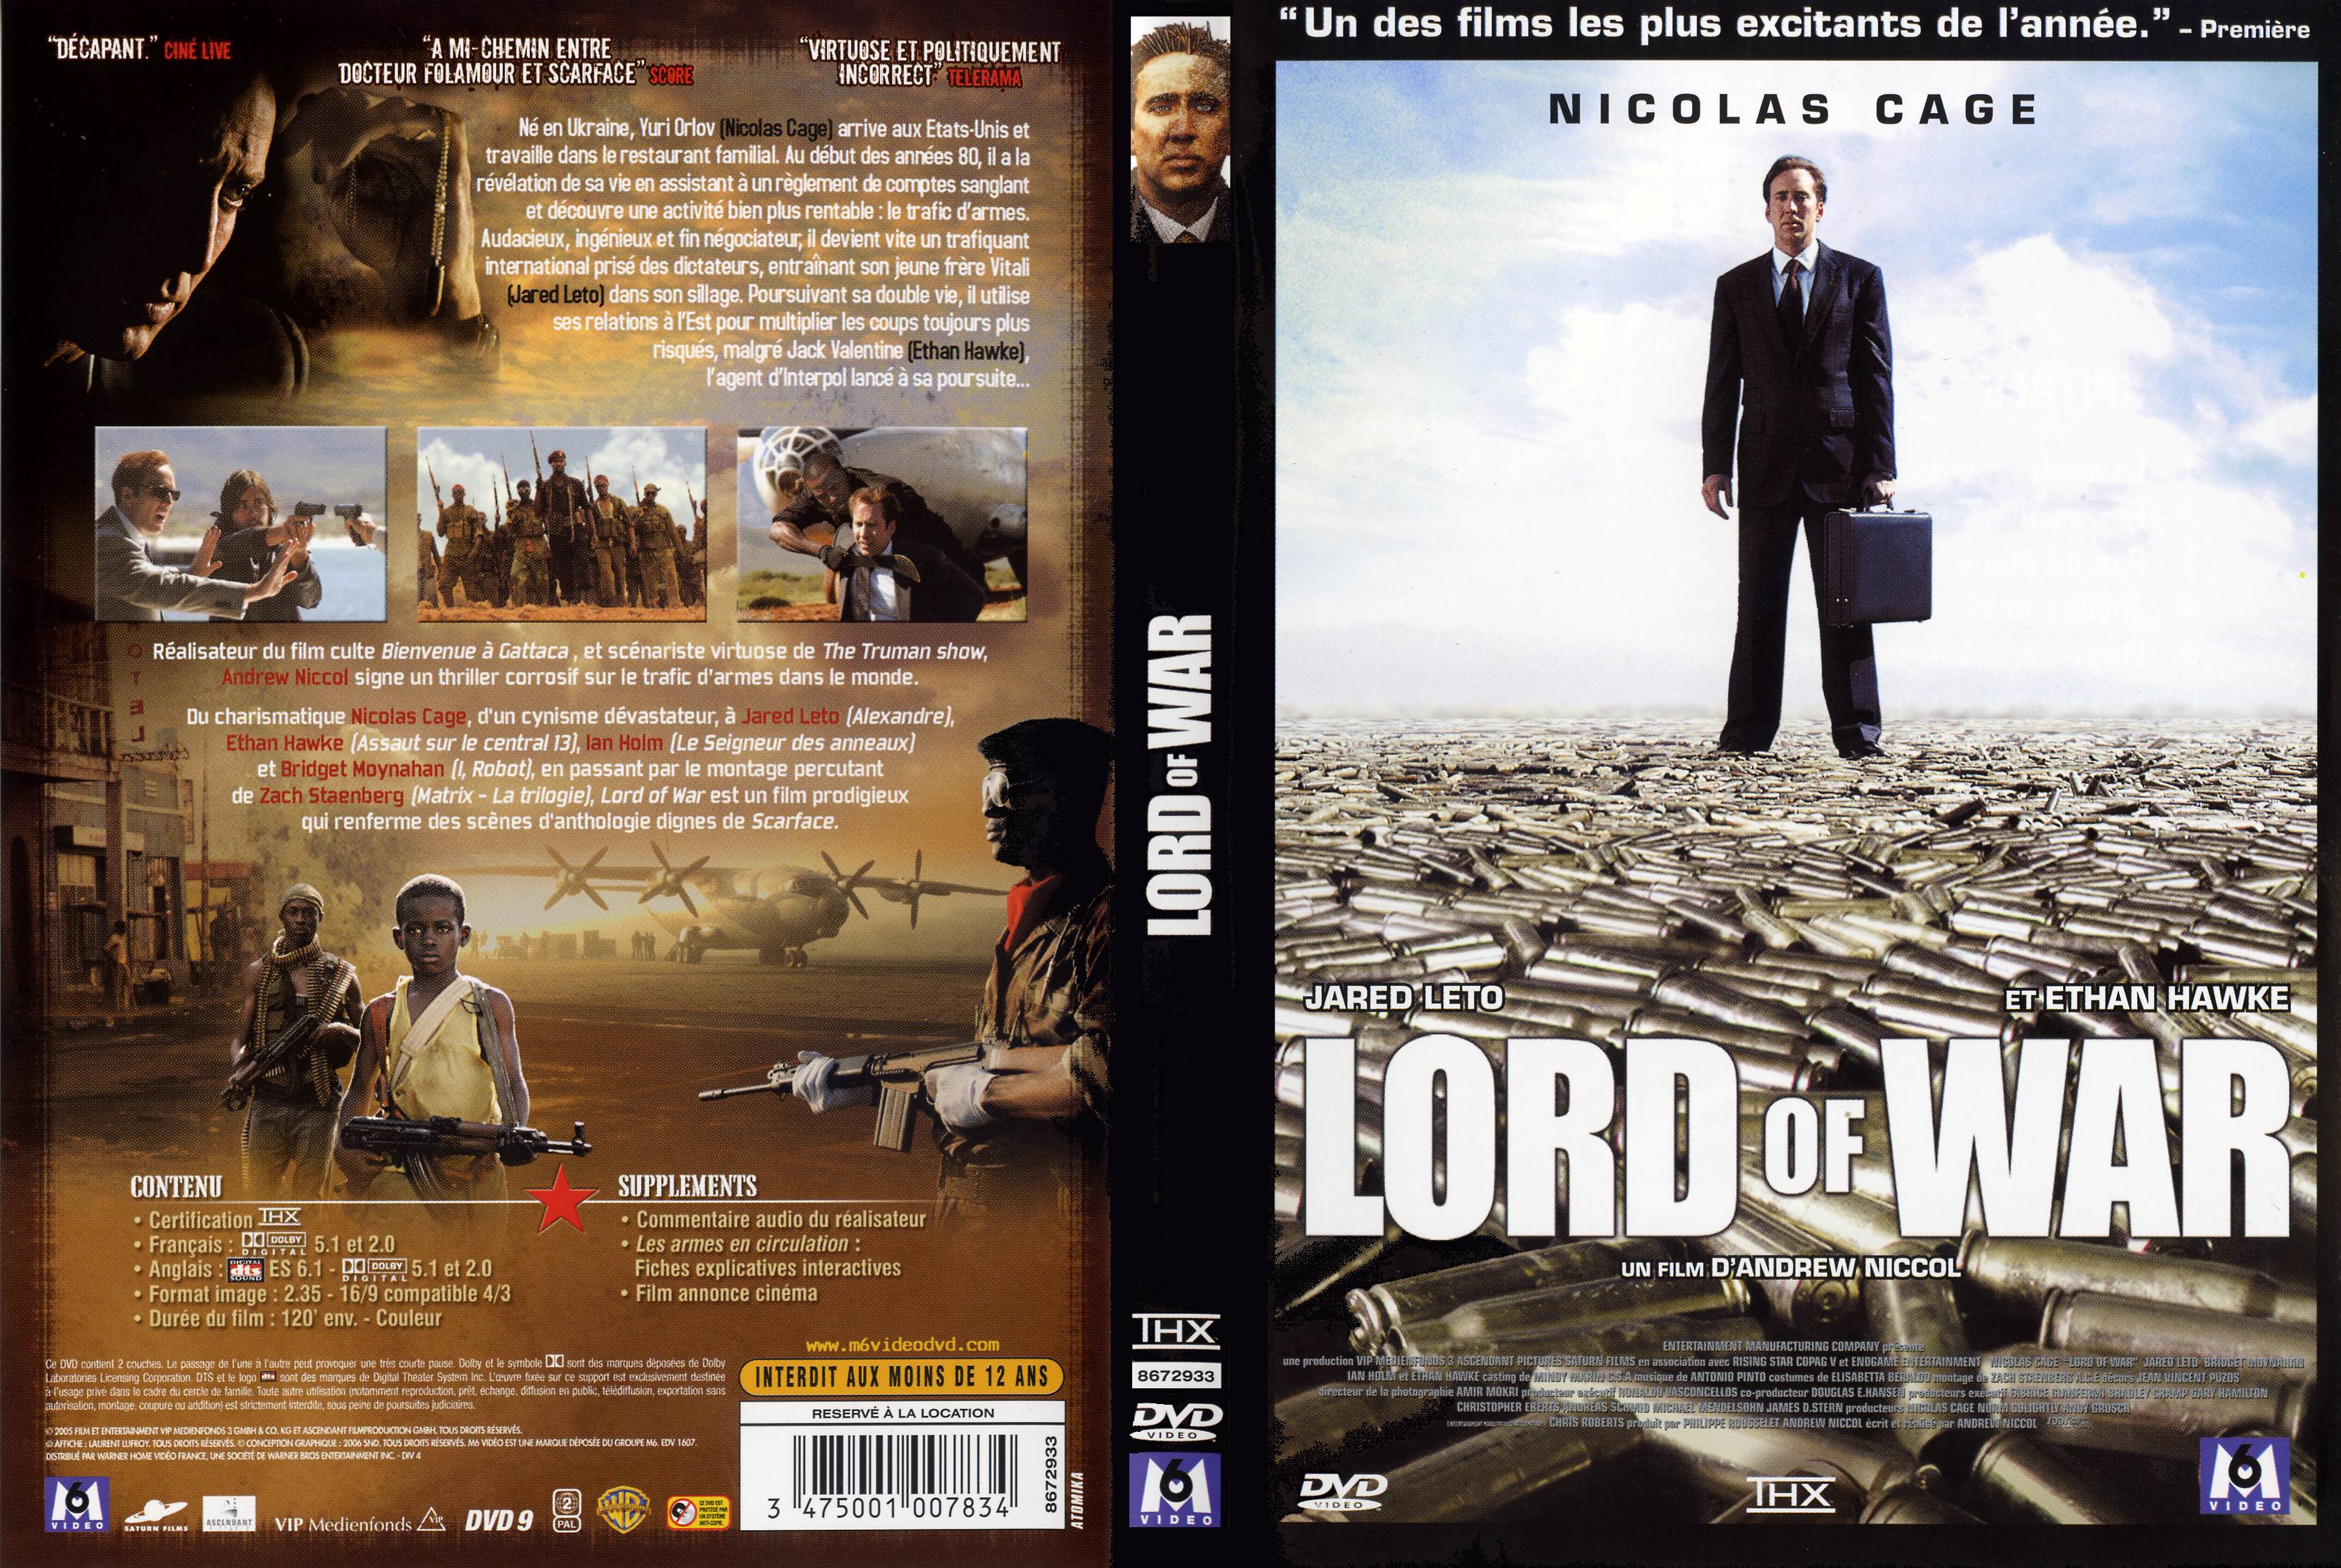 Jaquette DVD Lord of war